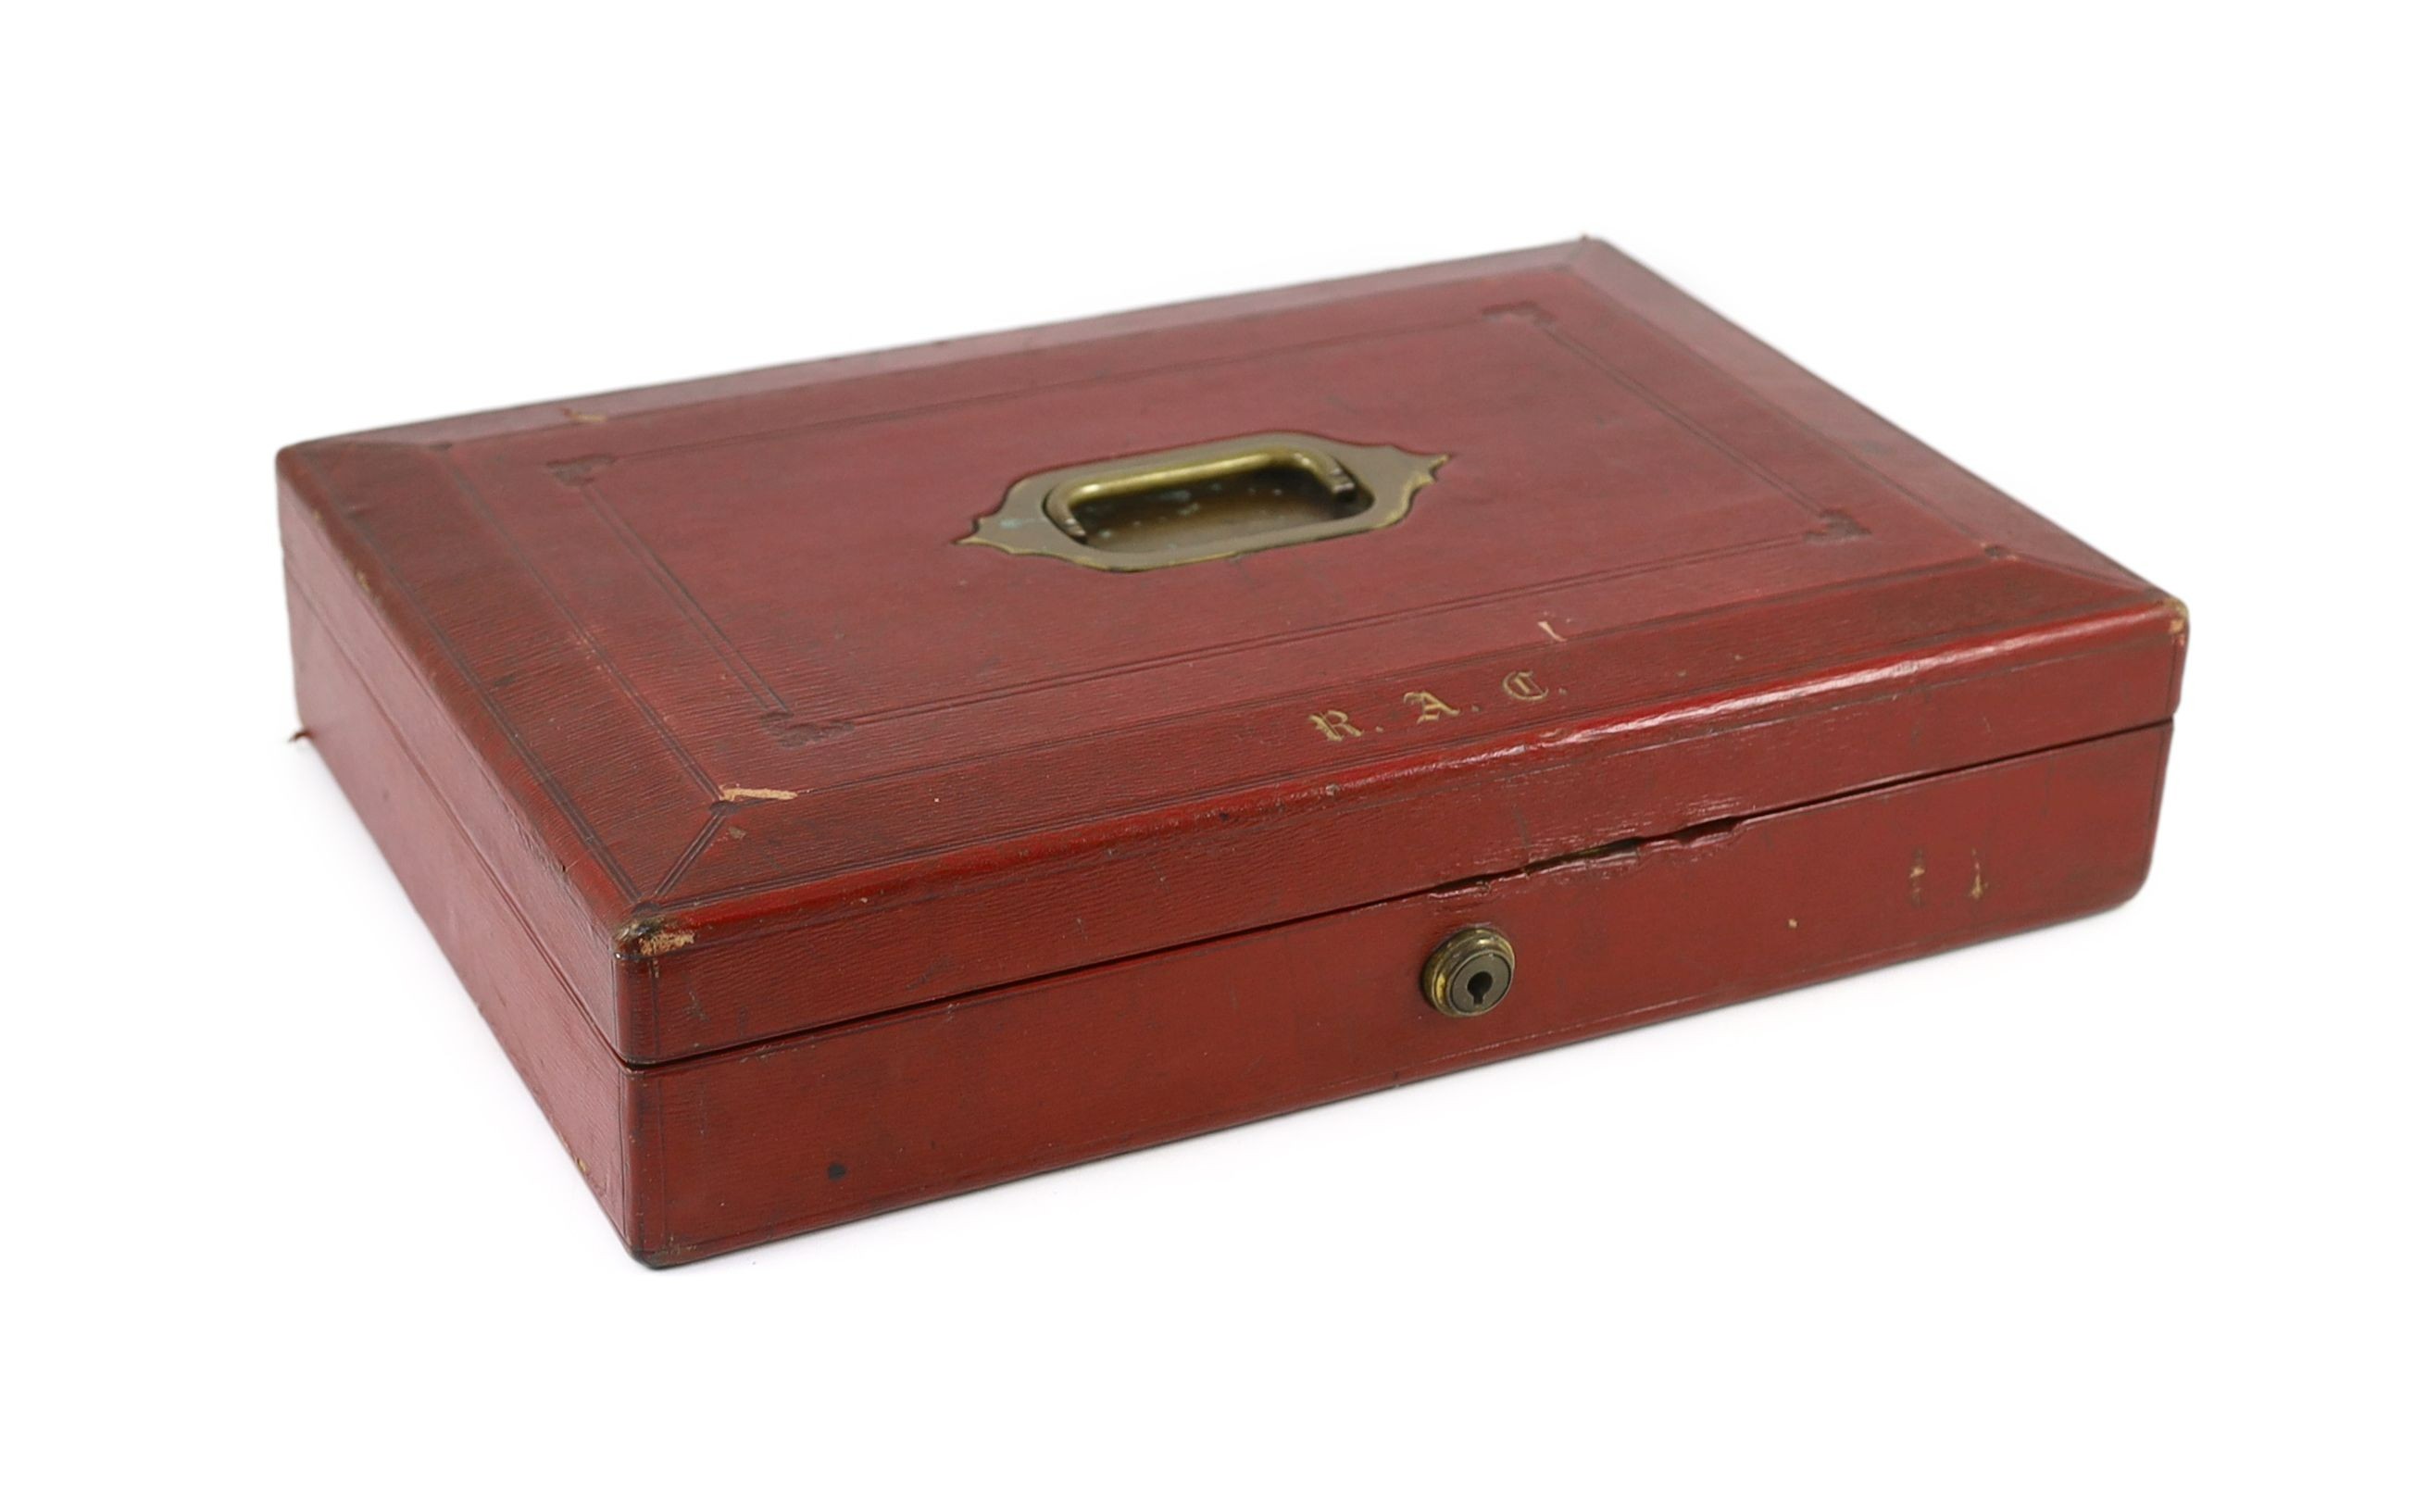 An early 20th century red morocco despatch box, formerly the property of Richard Assheton Cross, b.1882, width 42cm, depth 30cm, height 9.5cm                                                                               